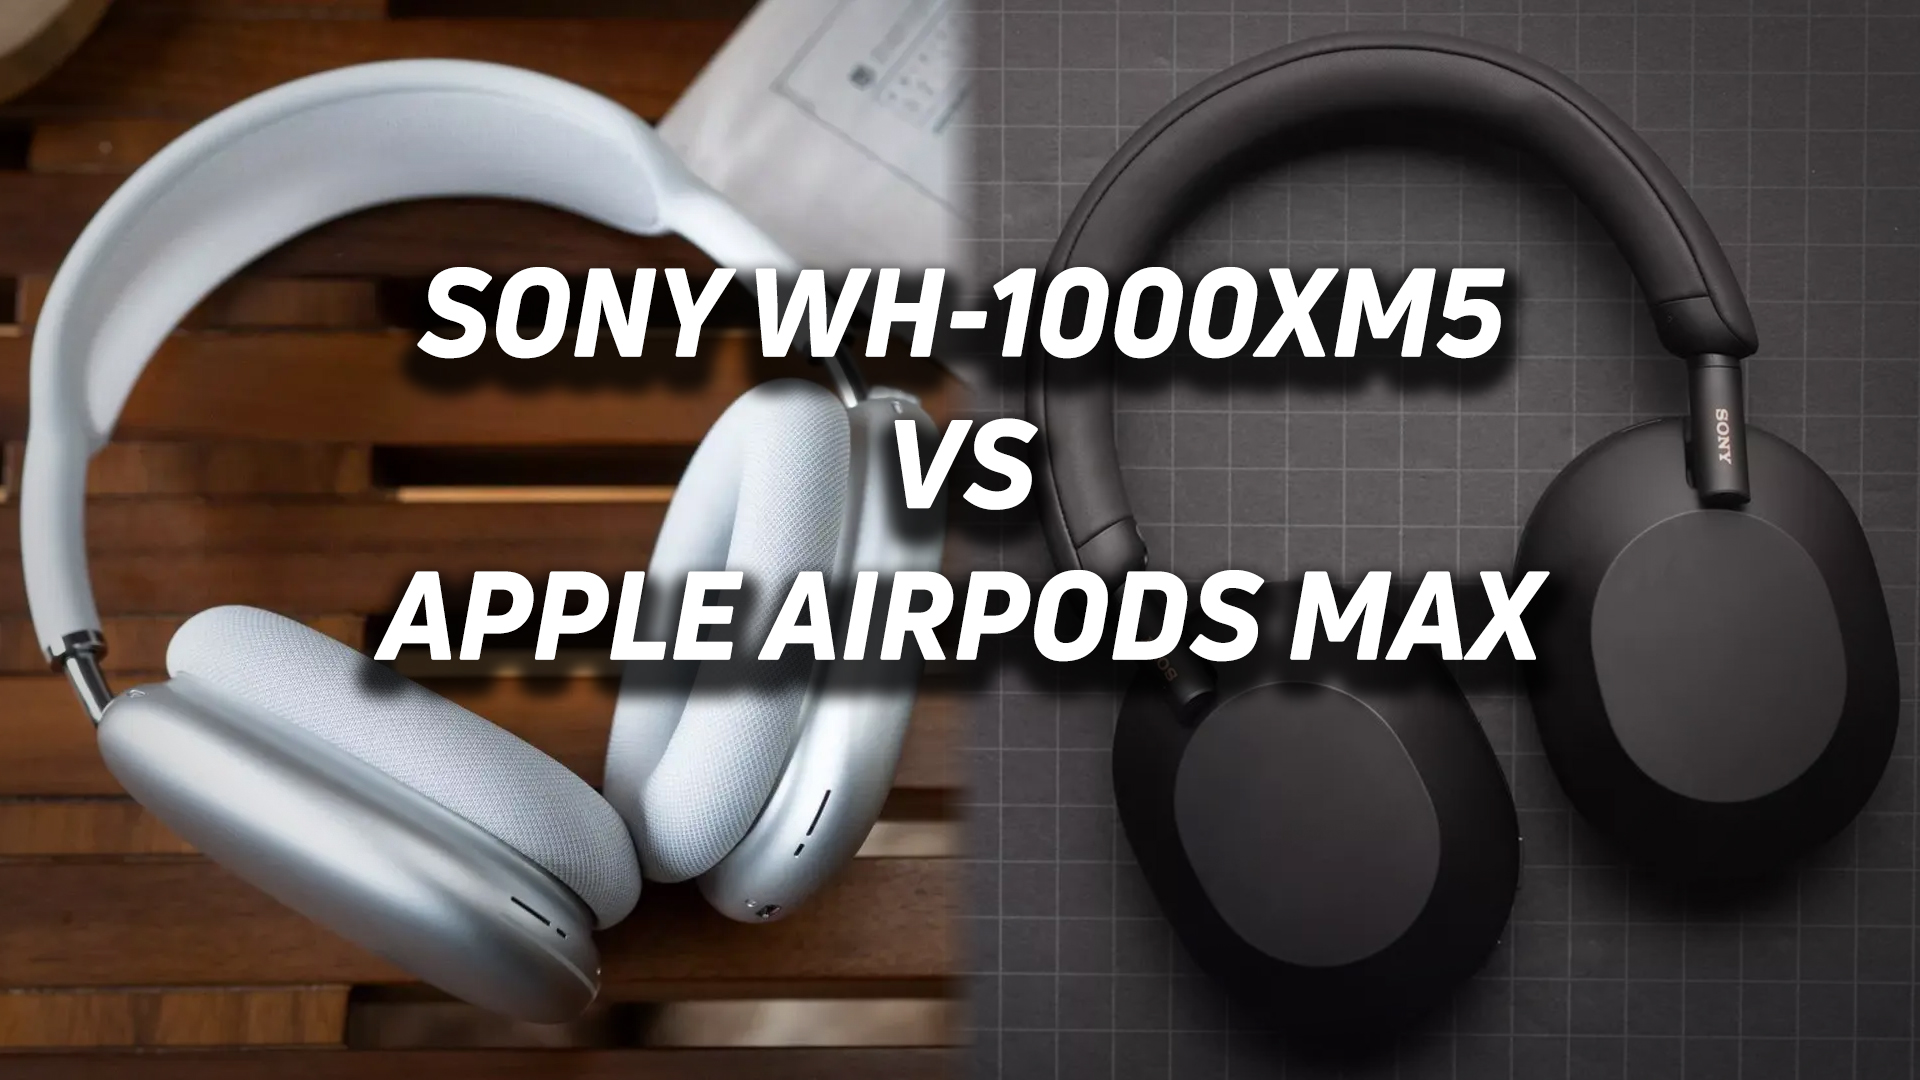 Sony WH-1000XM5 vs Apple AirPods Max - SoundGuys